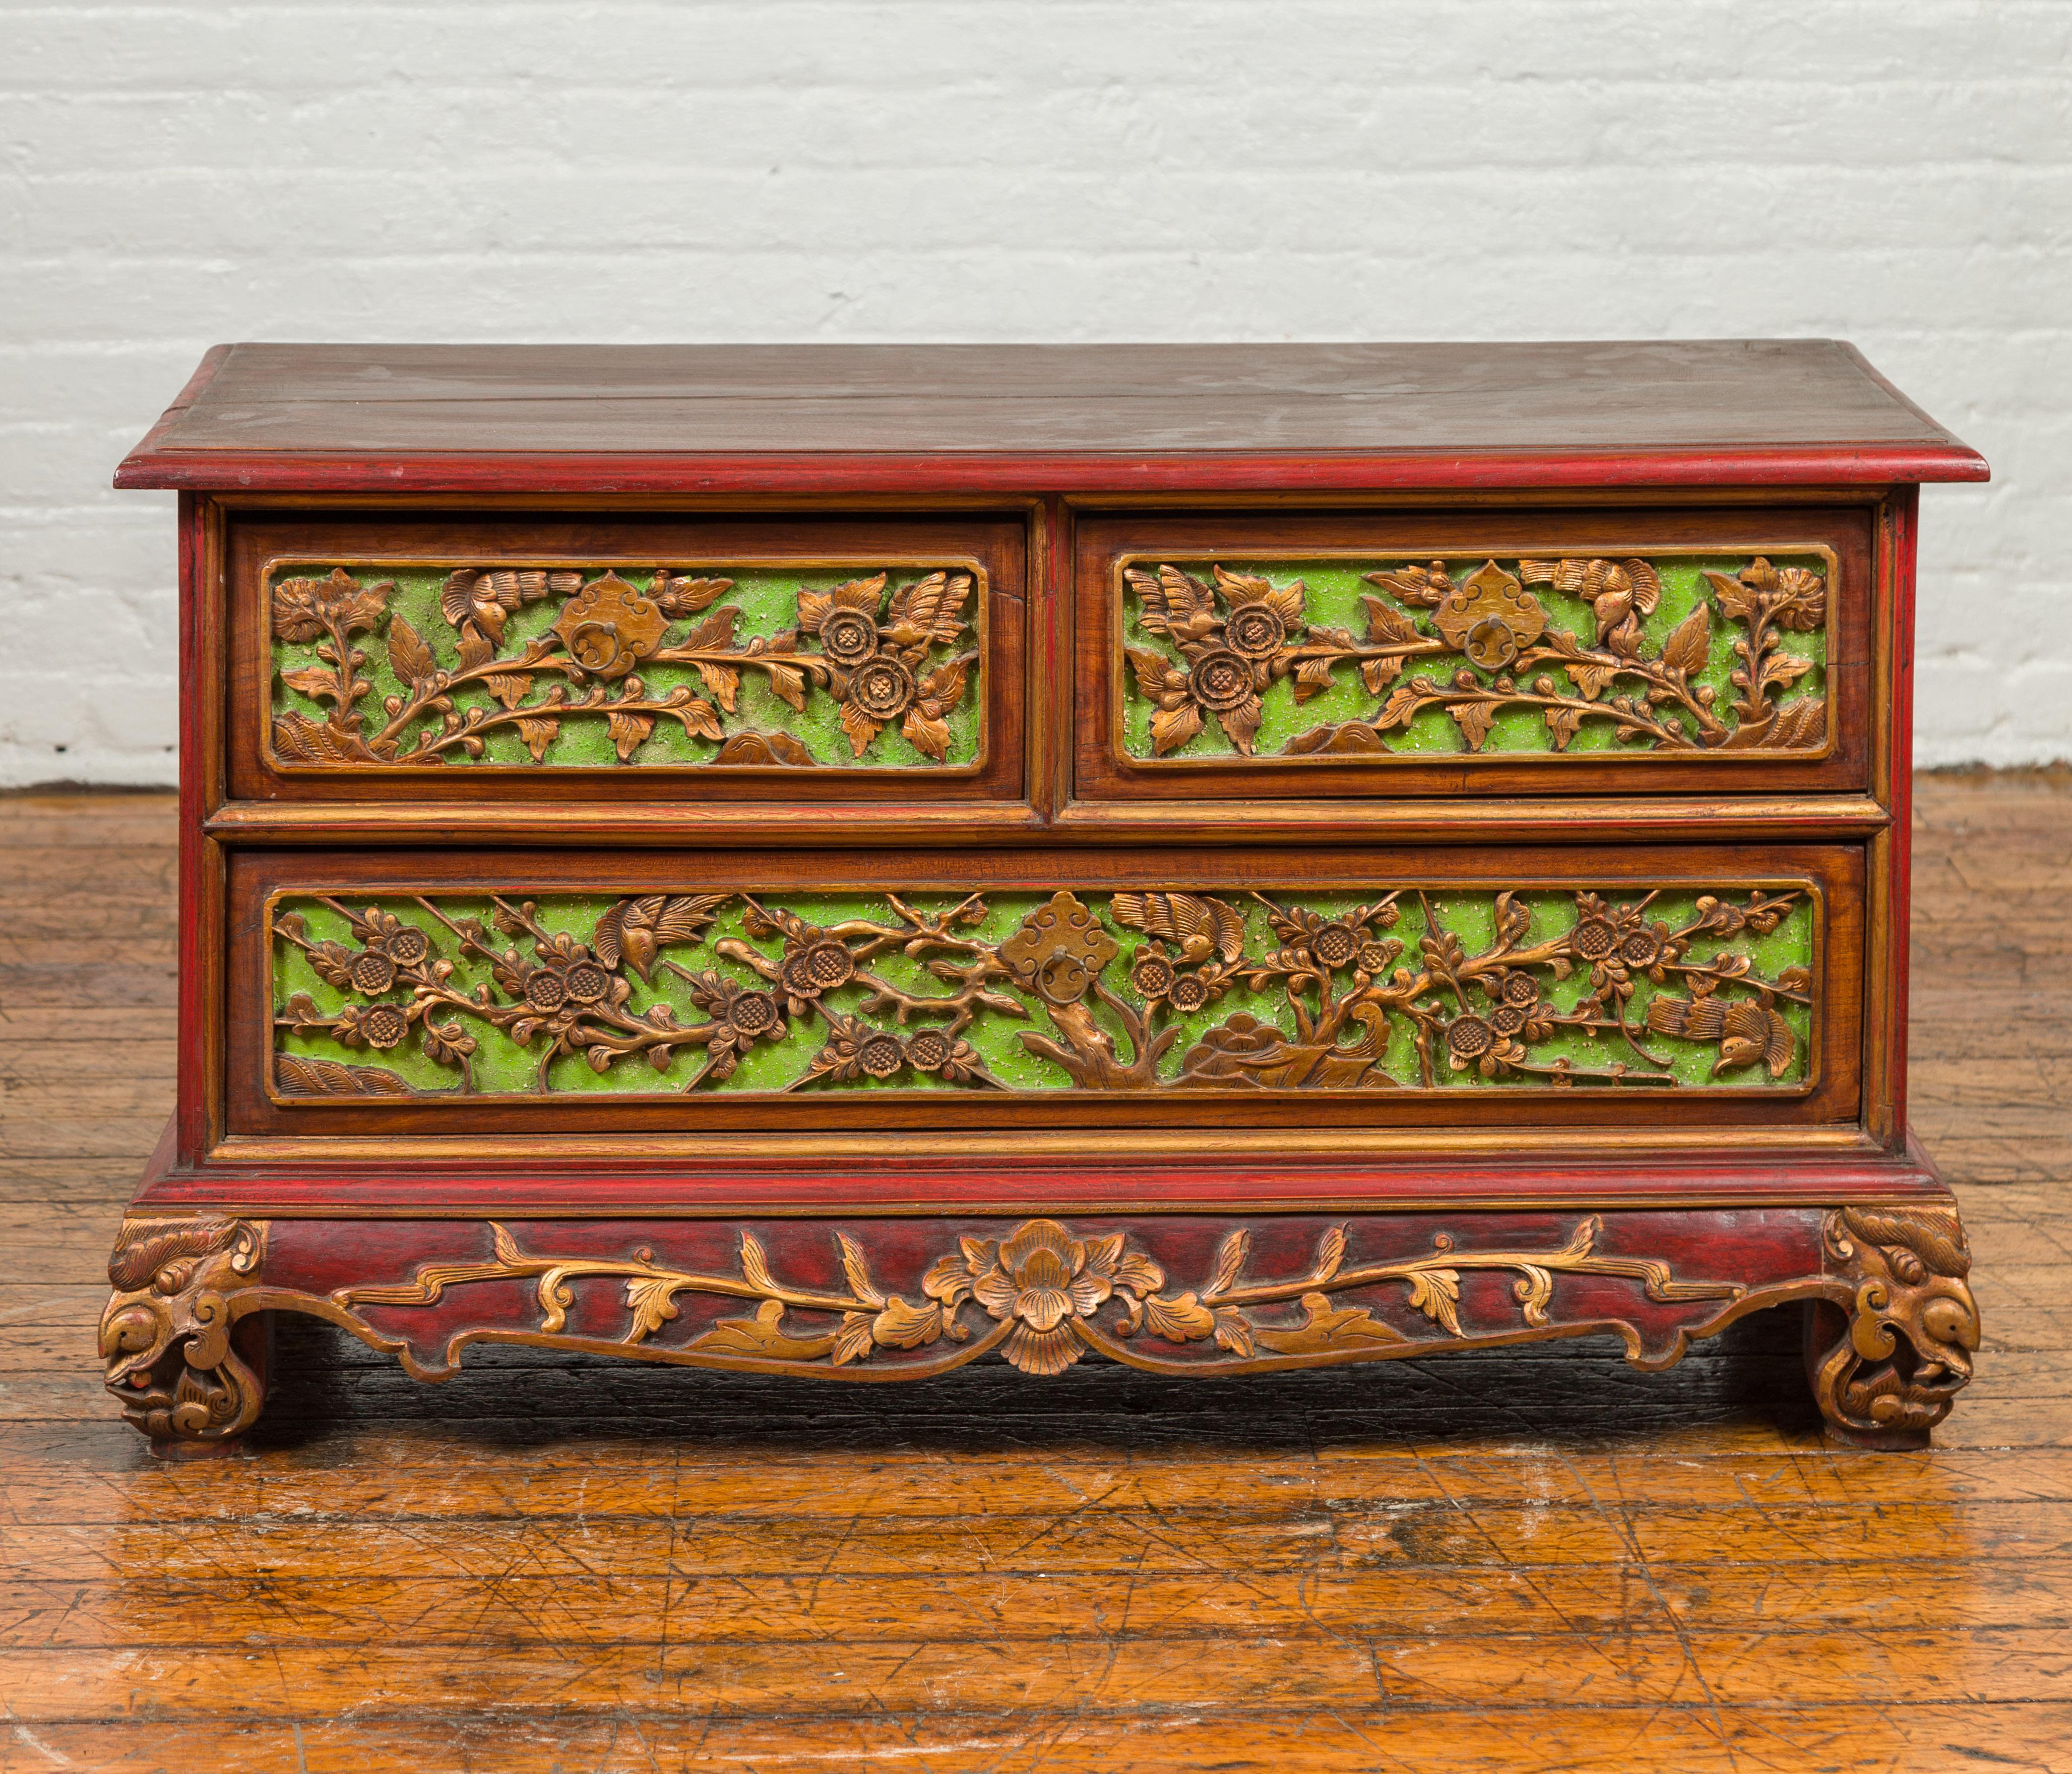 Wood 19th Century Polychrome Three-Drawer Chest from Madura with Carved Floral Motifs For Sale